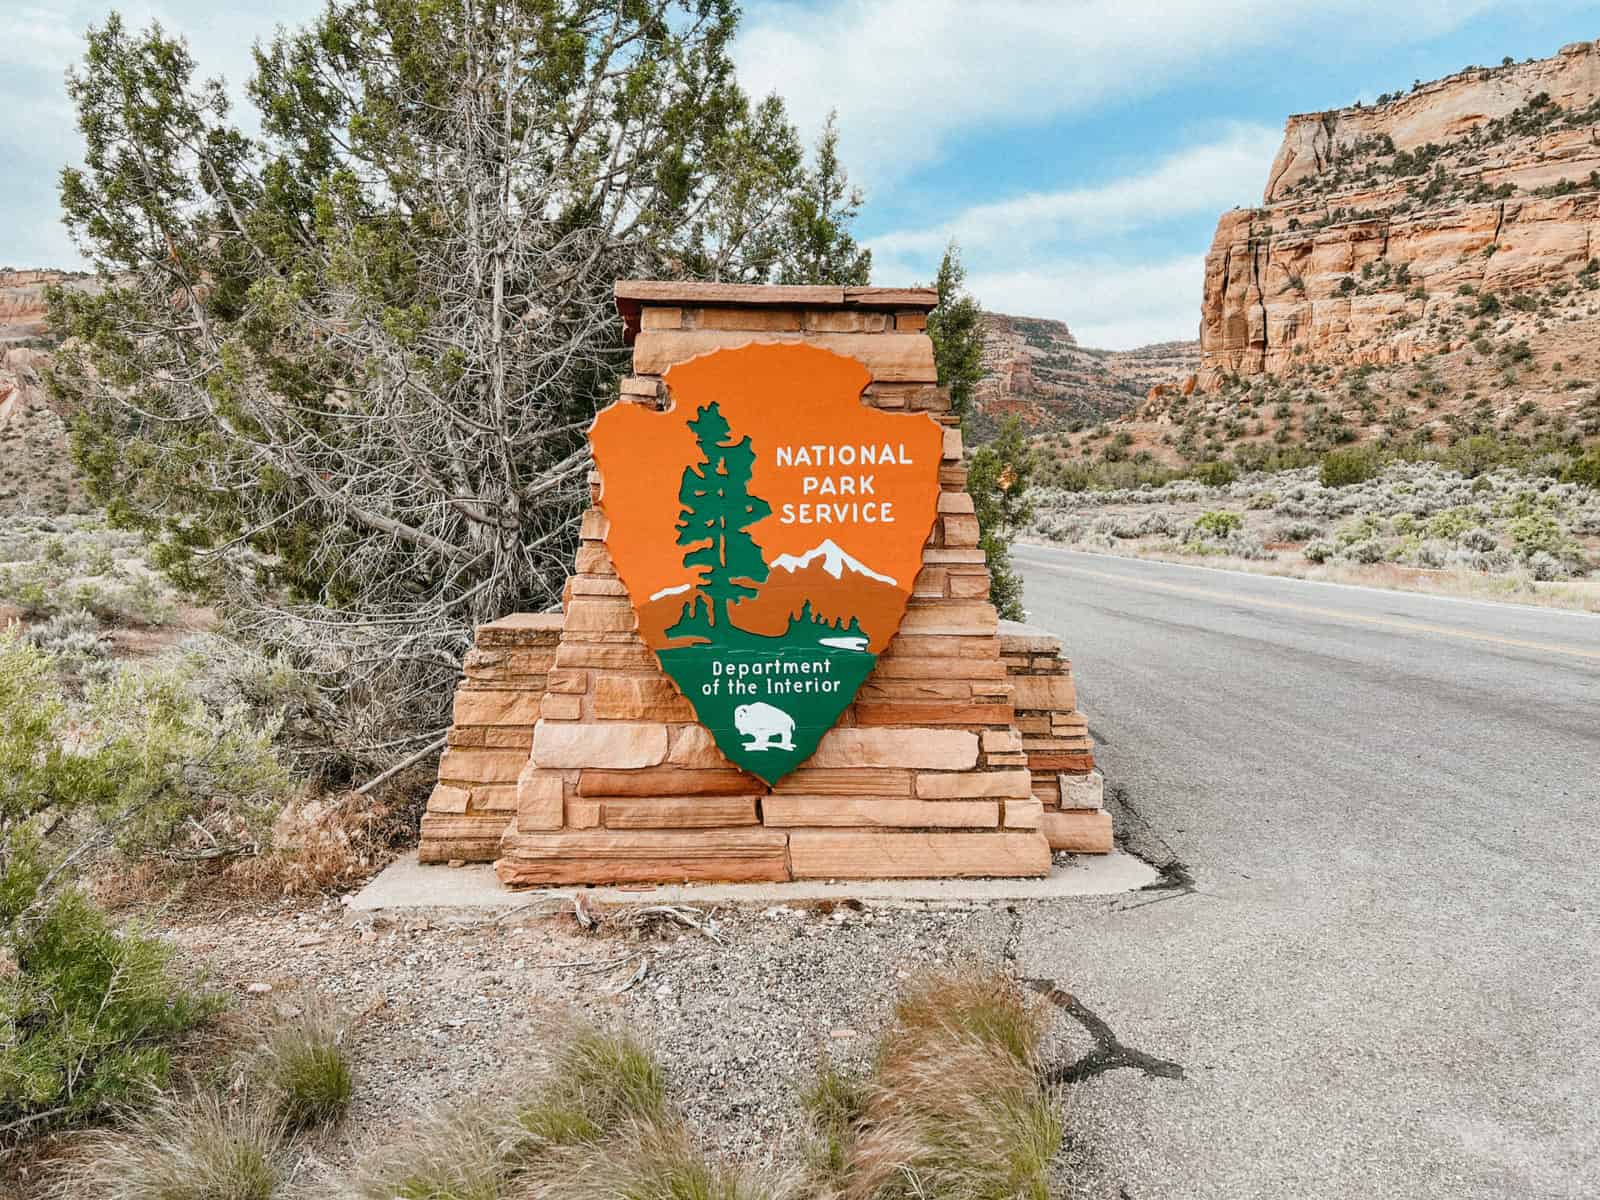 One of the National Park Services signs.